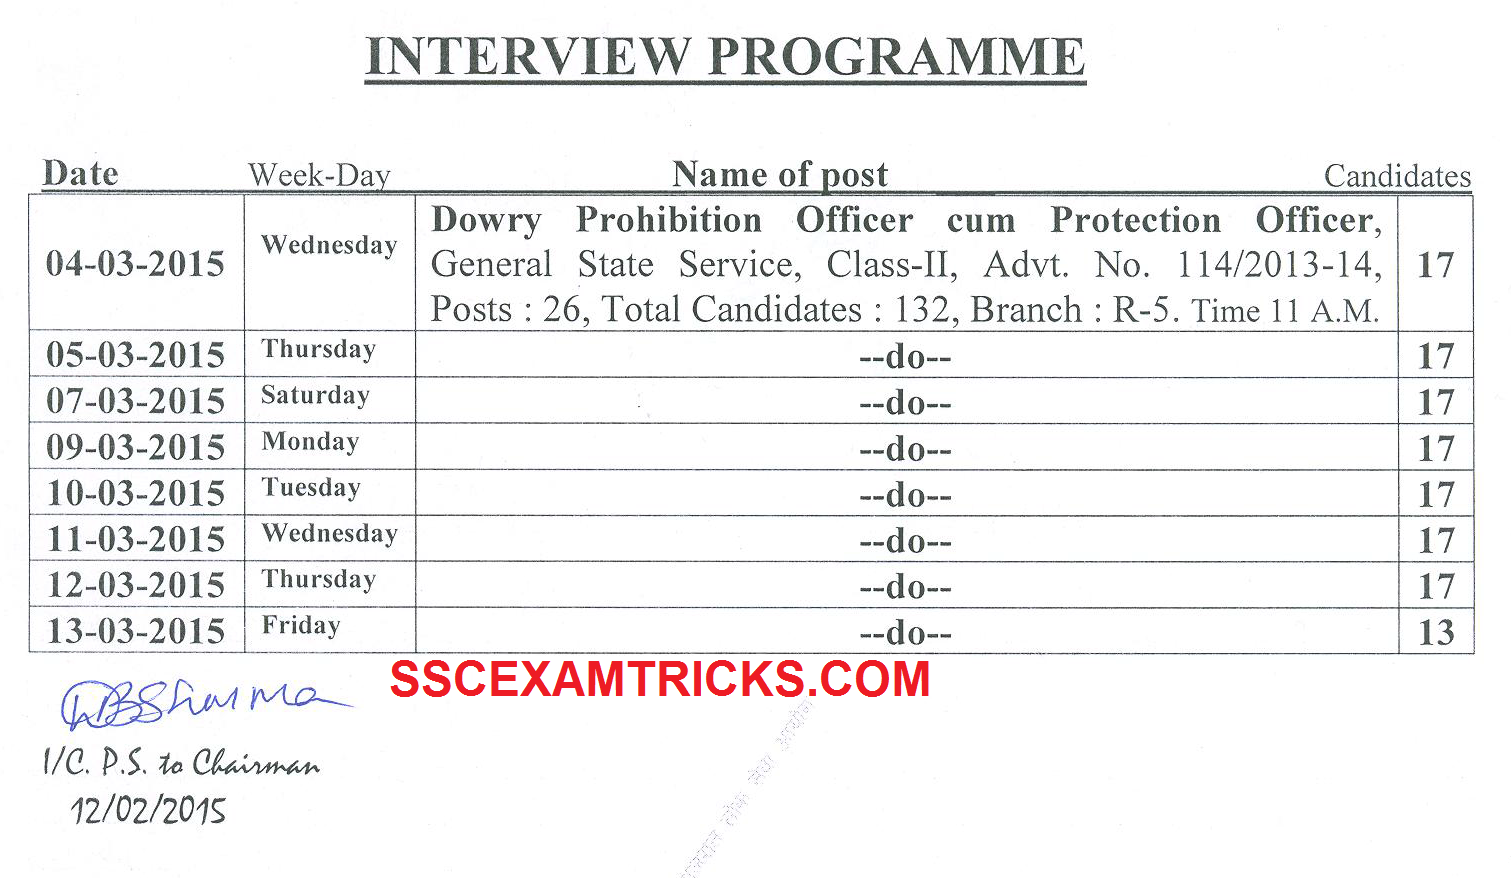 GPSC DO INTERVIEW 2015